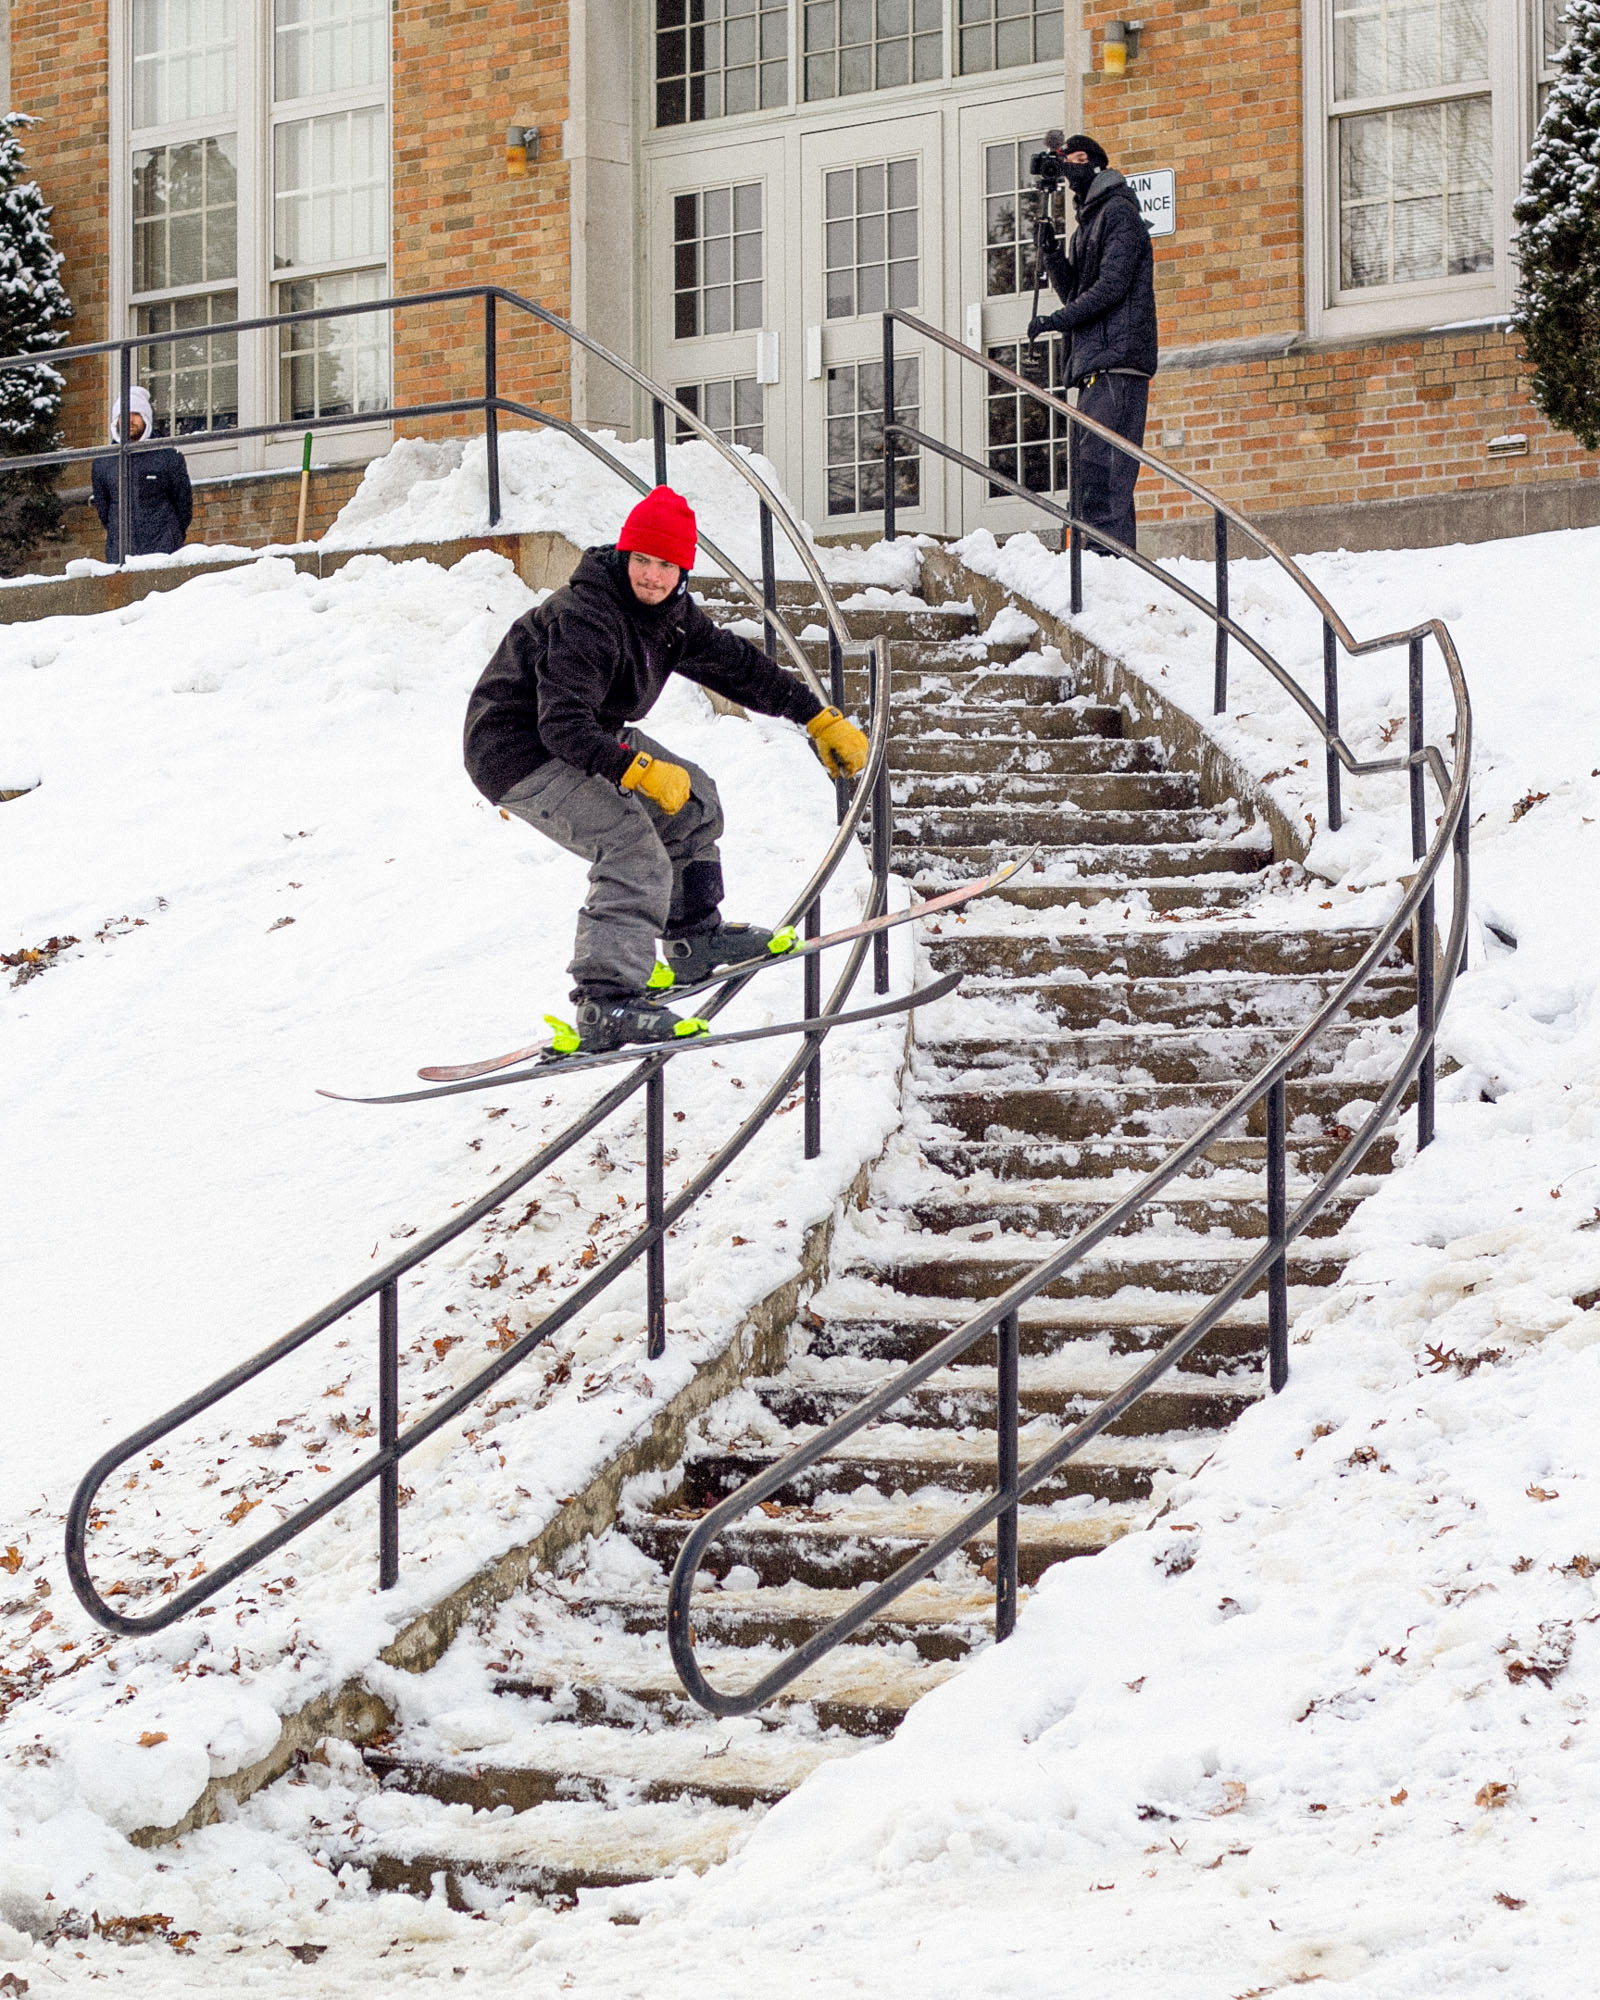 Calvin Barrett skiing for the new Strictly all-street film 